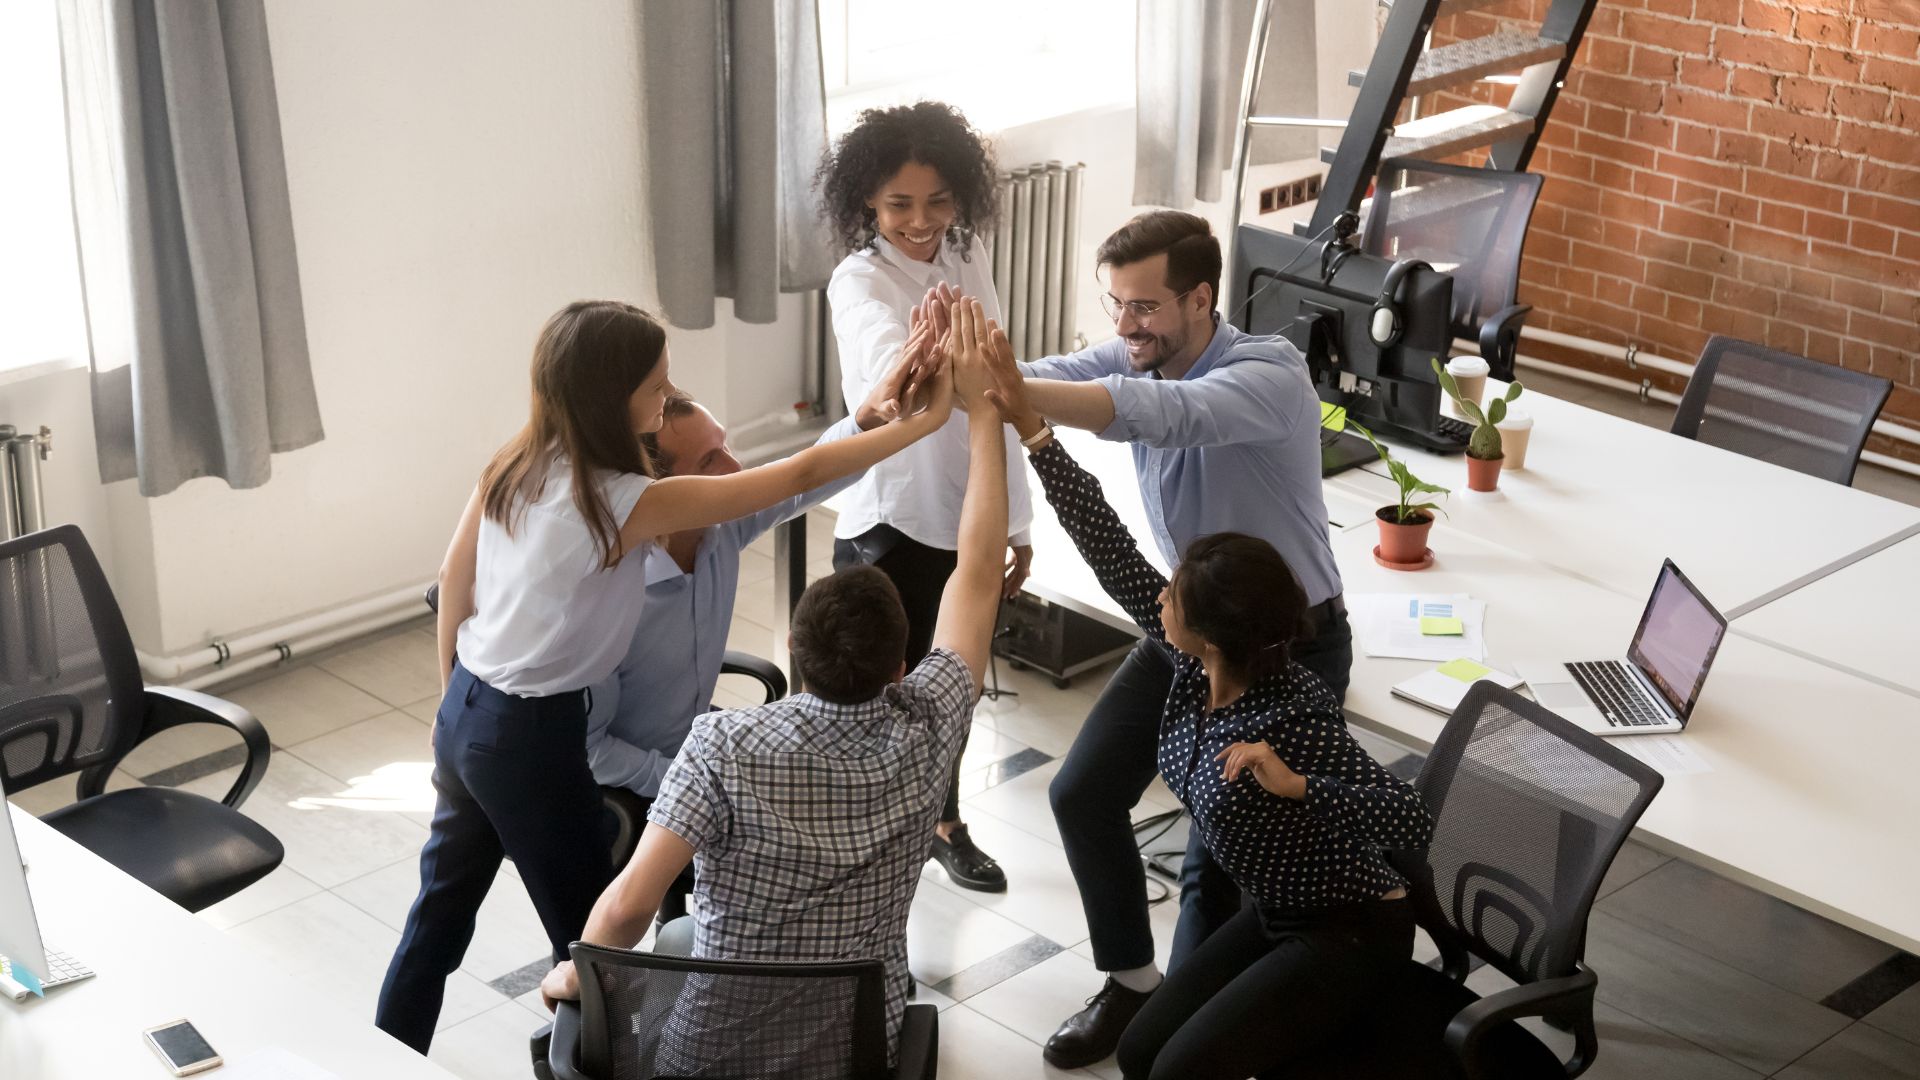 A group of six digital marketing team members celebrating the success of their campaign with high fives in the office.